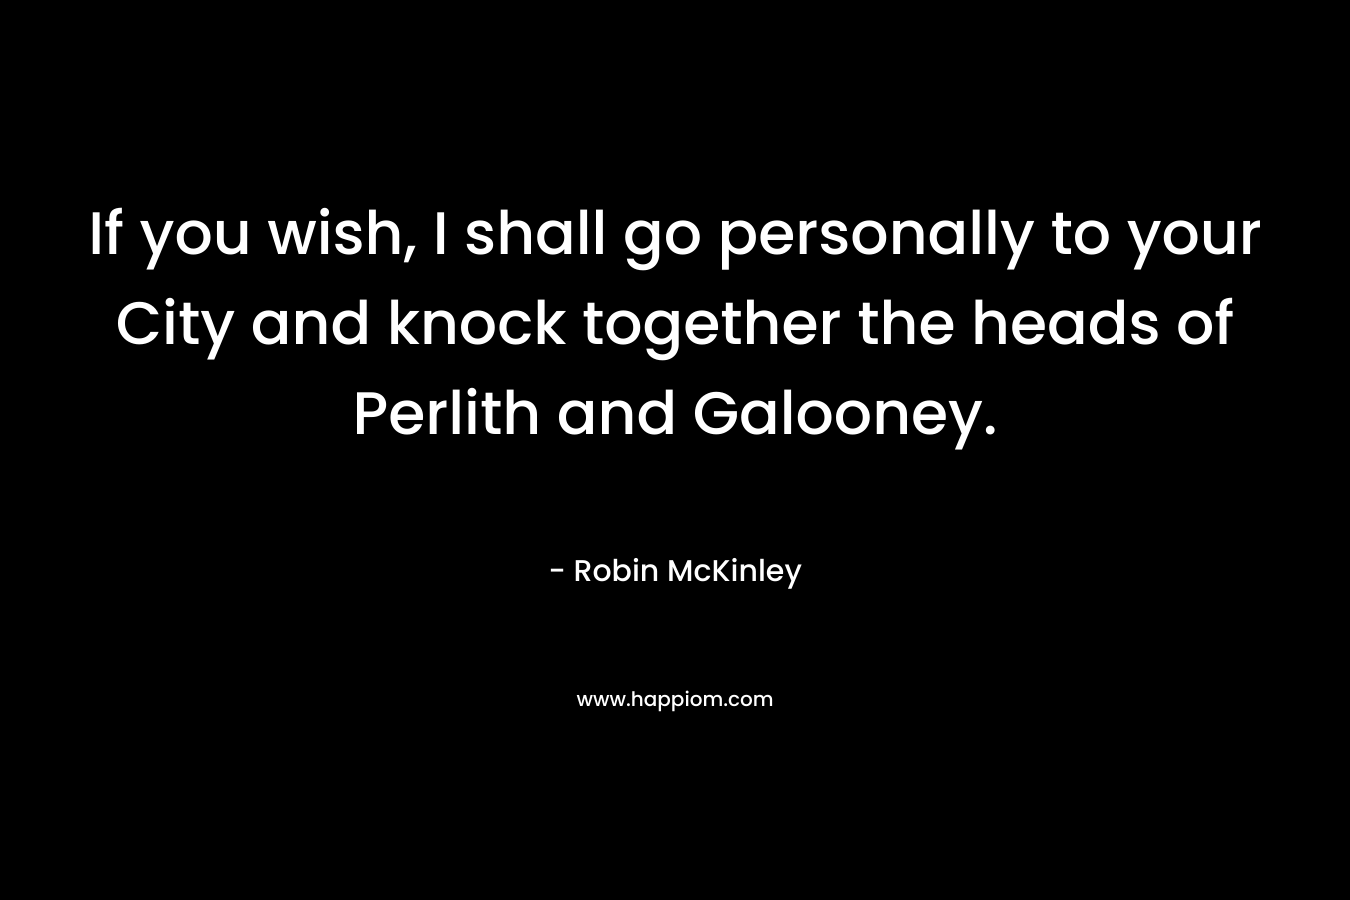 If you wish, I shall go personally to your City and knock together the heads of Perlith and Galooney. – Robin McKinley